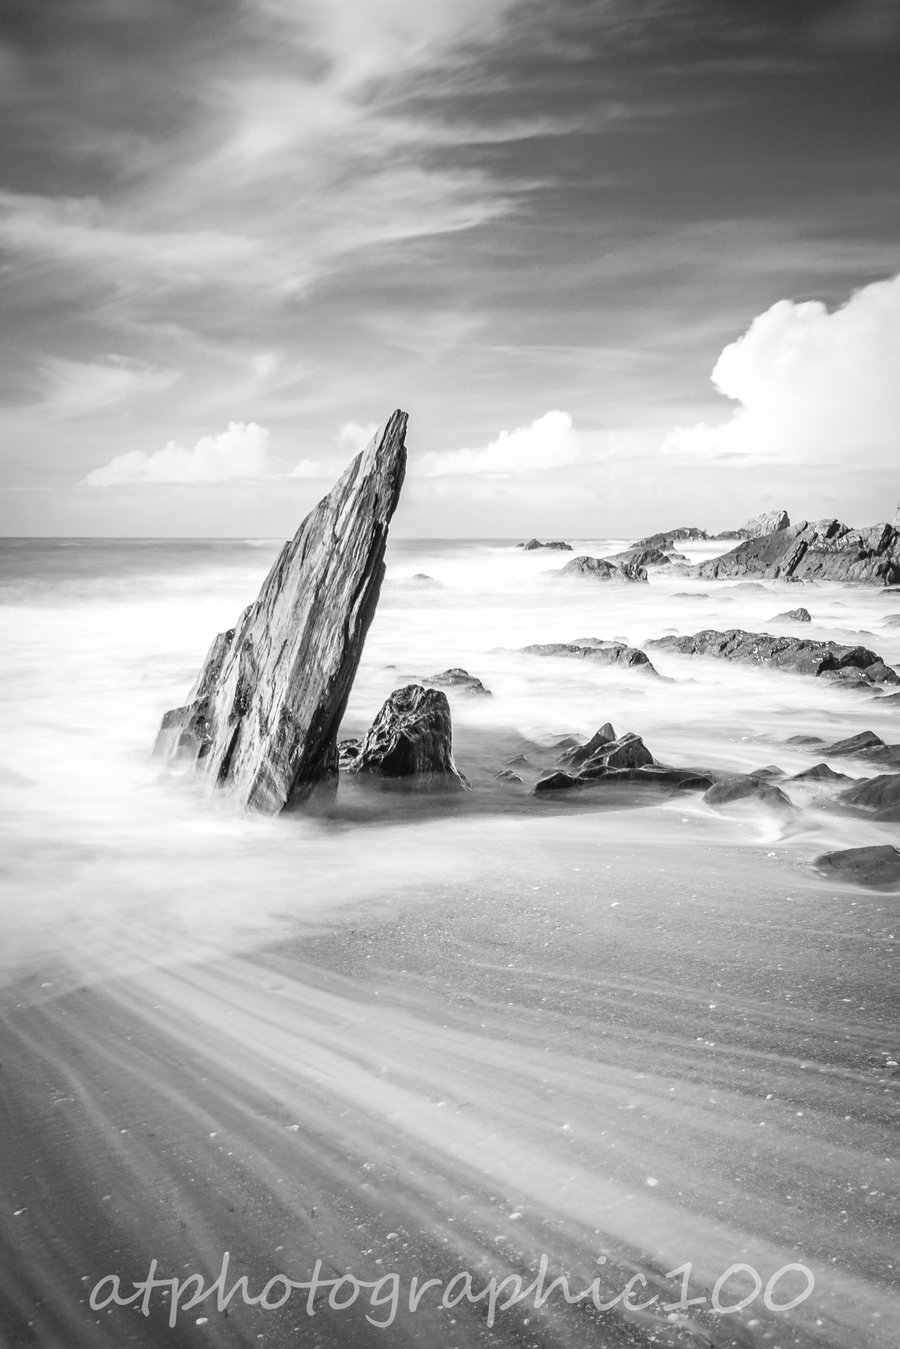 Photograph -Ayrmer Cove Rock - Limited Edition Signed Print